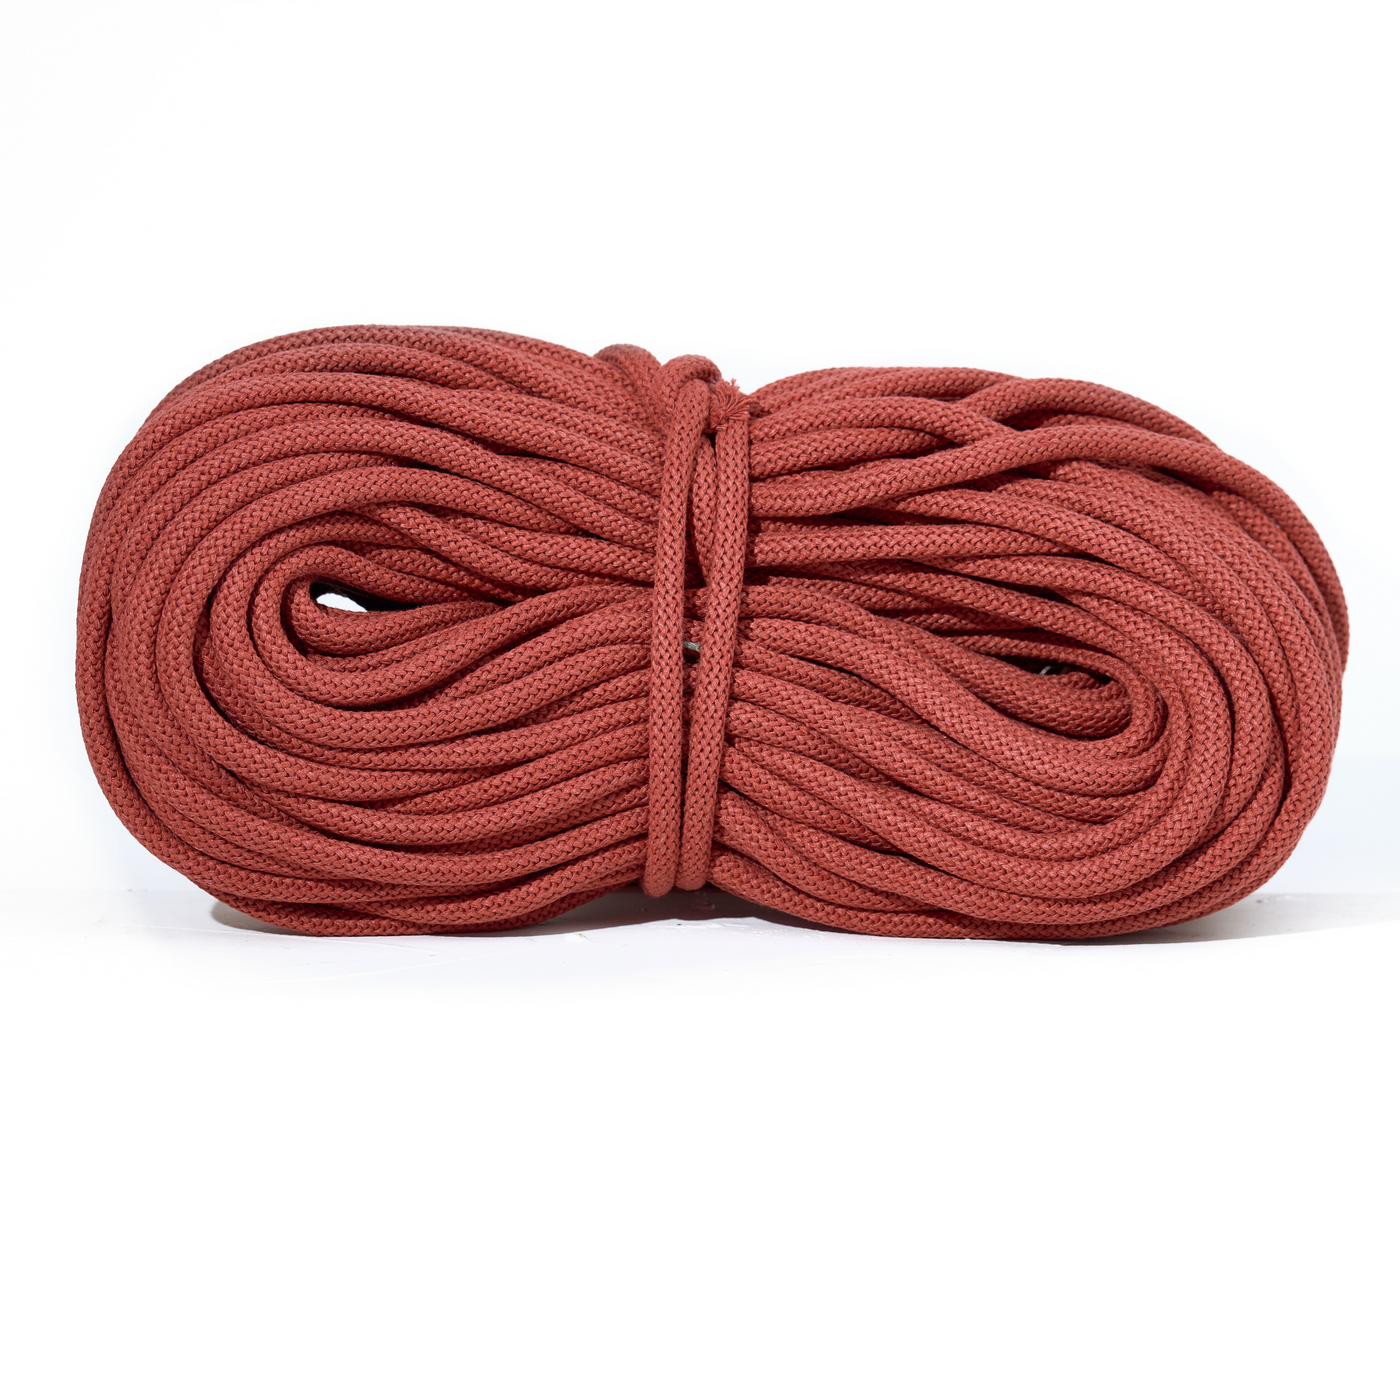 Braided Recycled Cotton Cord 9mm - Brick